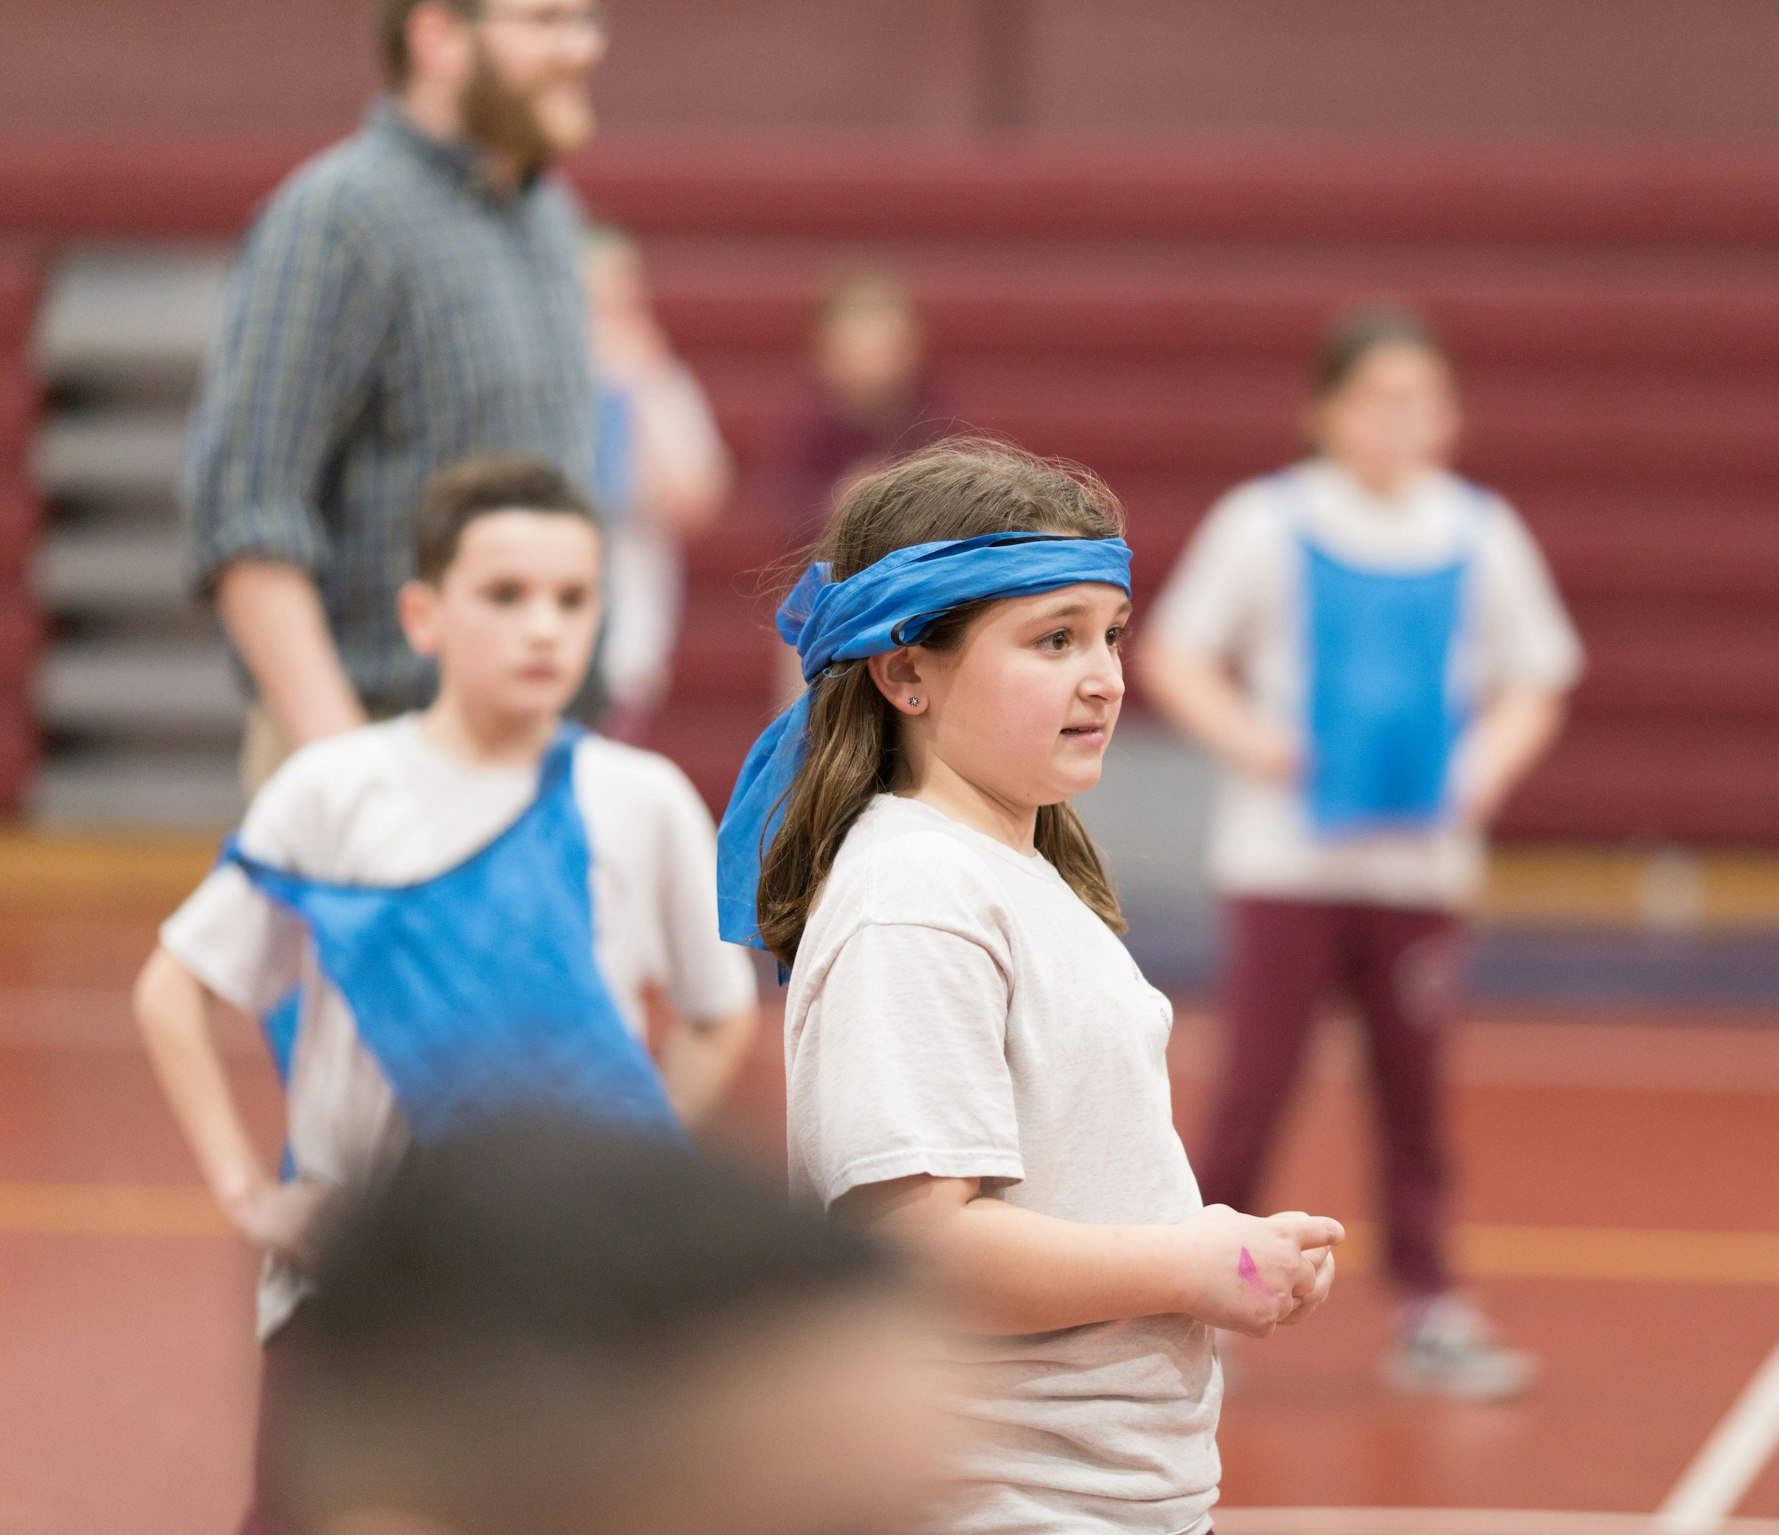 Young female student participating in an after school game in the gym